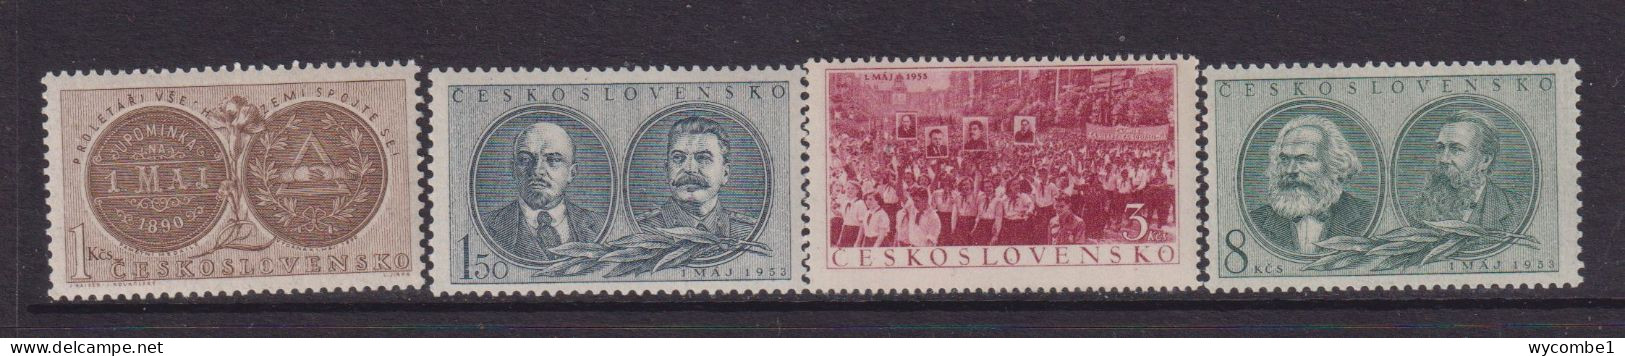 CZECHOSLOVAKIA  - 1953  Labour Day  Set  Never Hinged Mint - Unused Stamps